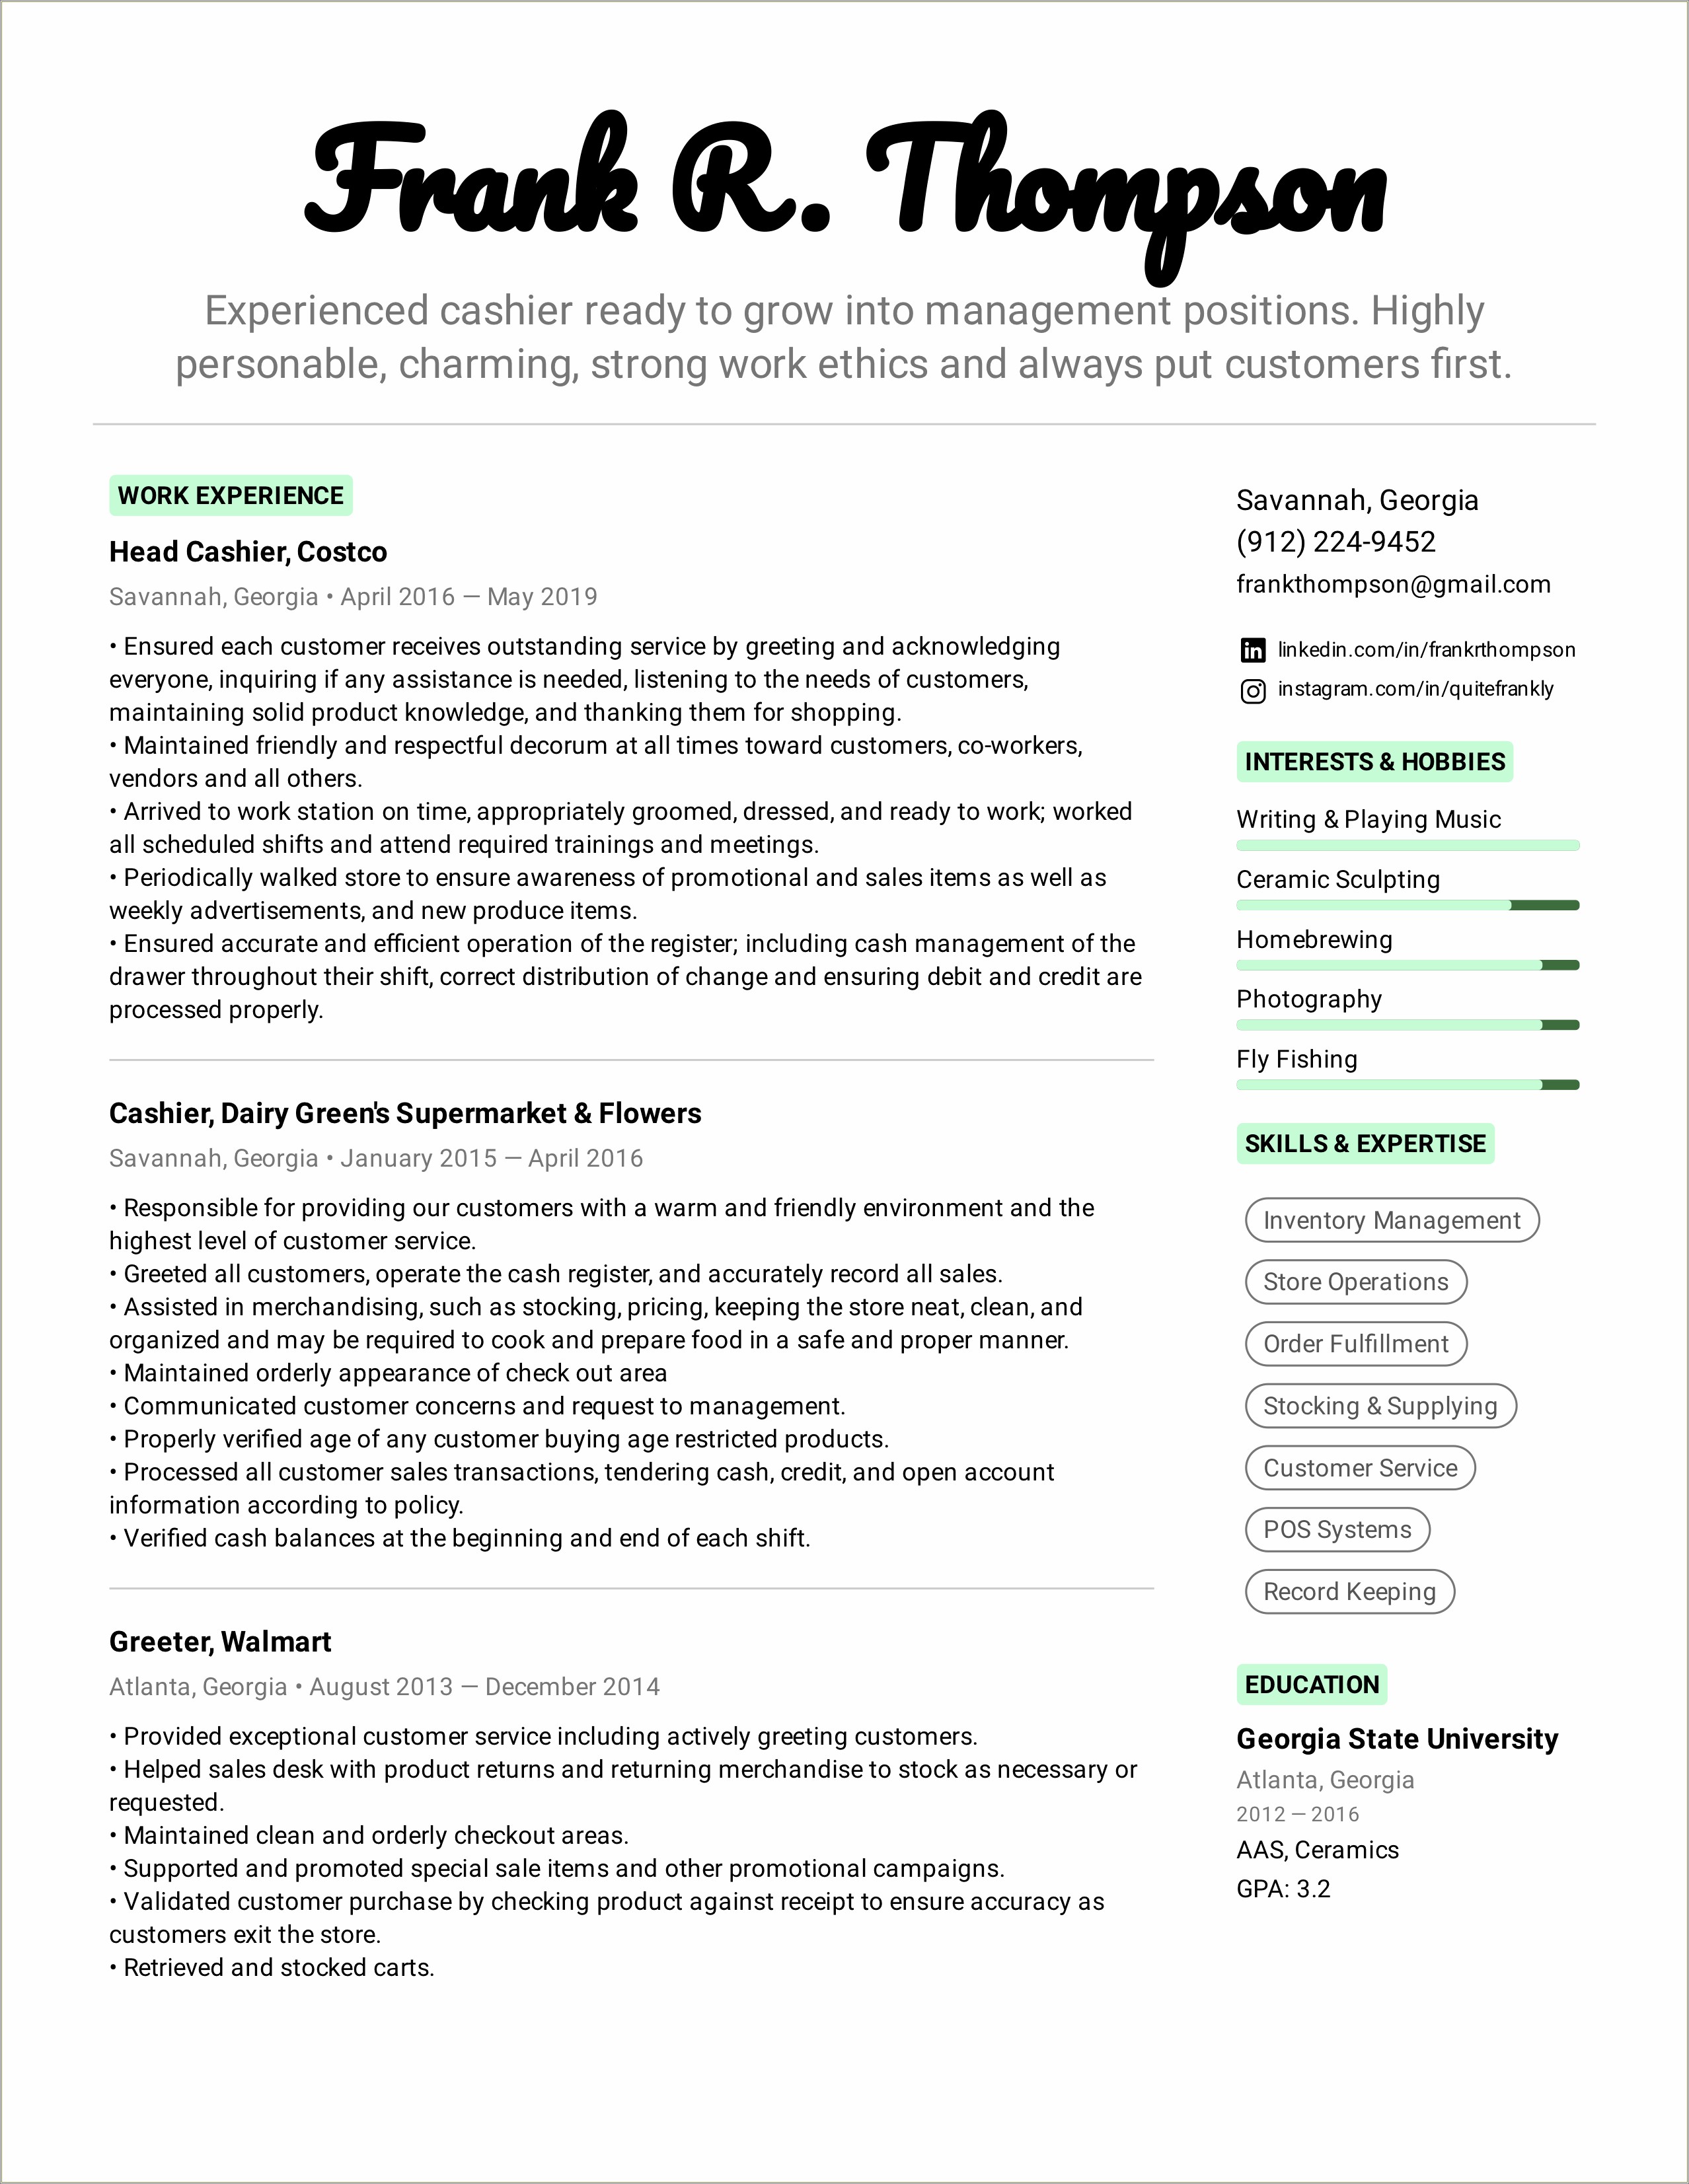 Resume For Work From Customer Service